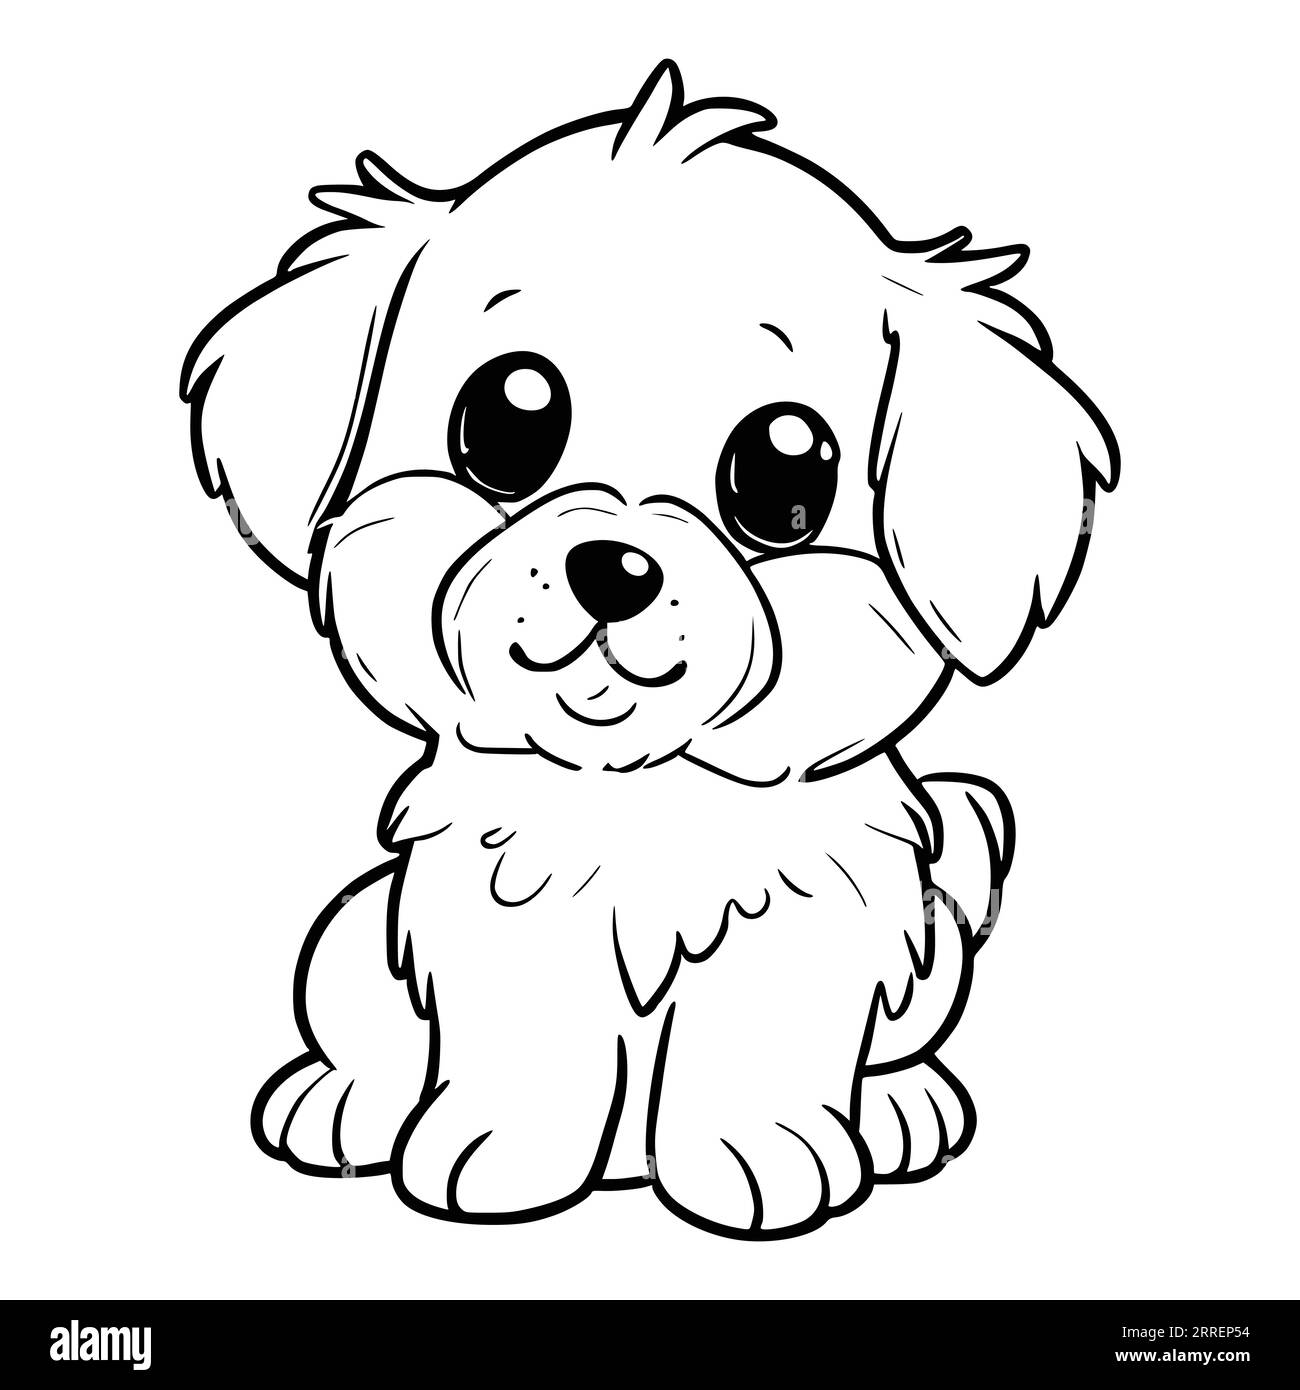 cute dog drawing printables - Google Search  Easy animal drawings, Animal  sketches easy, Puppy coloring pages